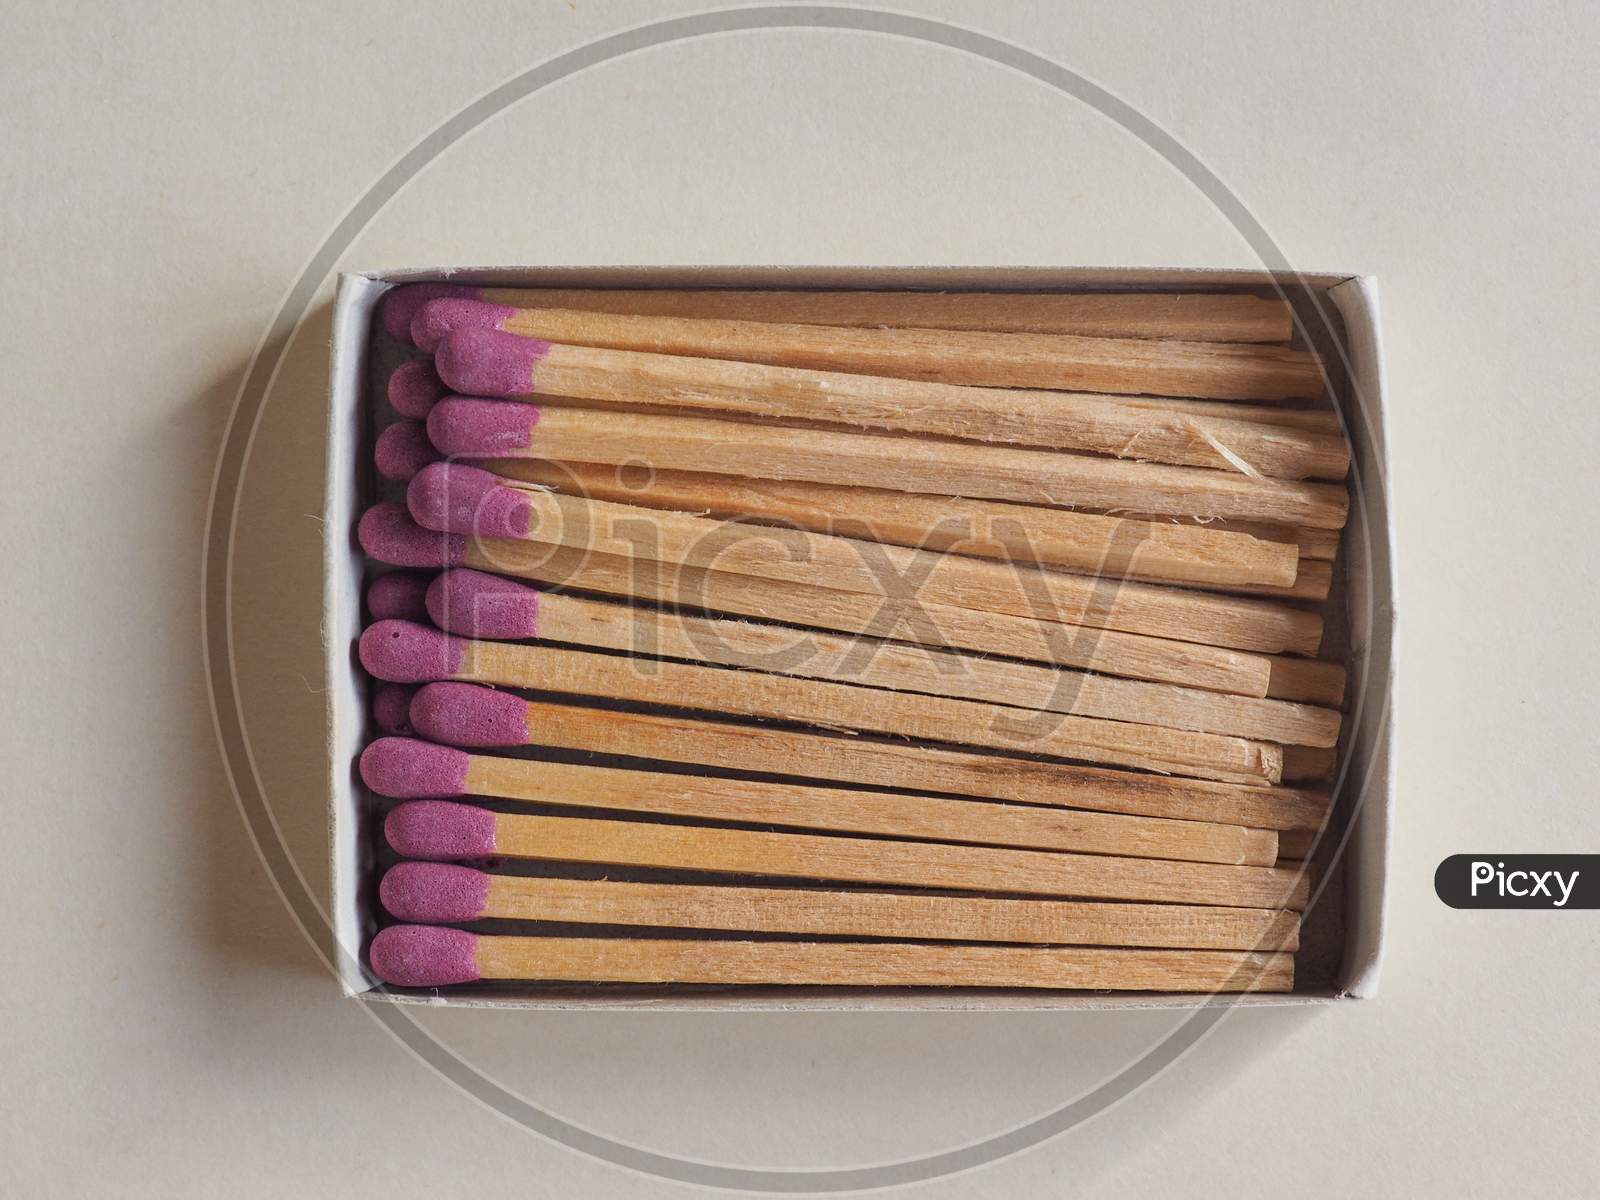 Matches In A Box